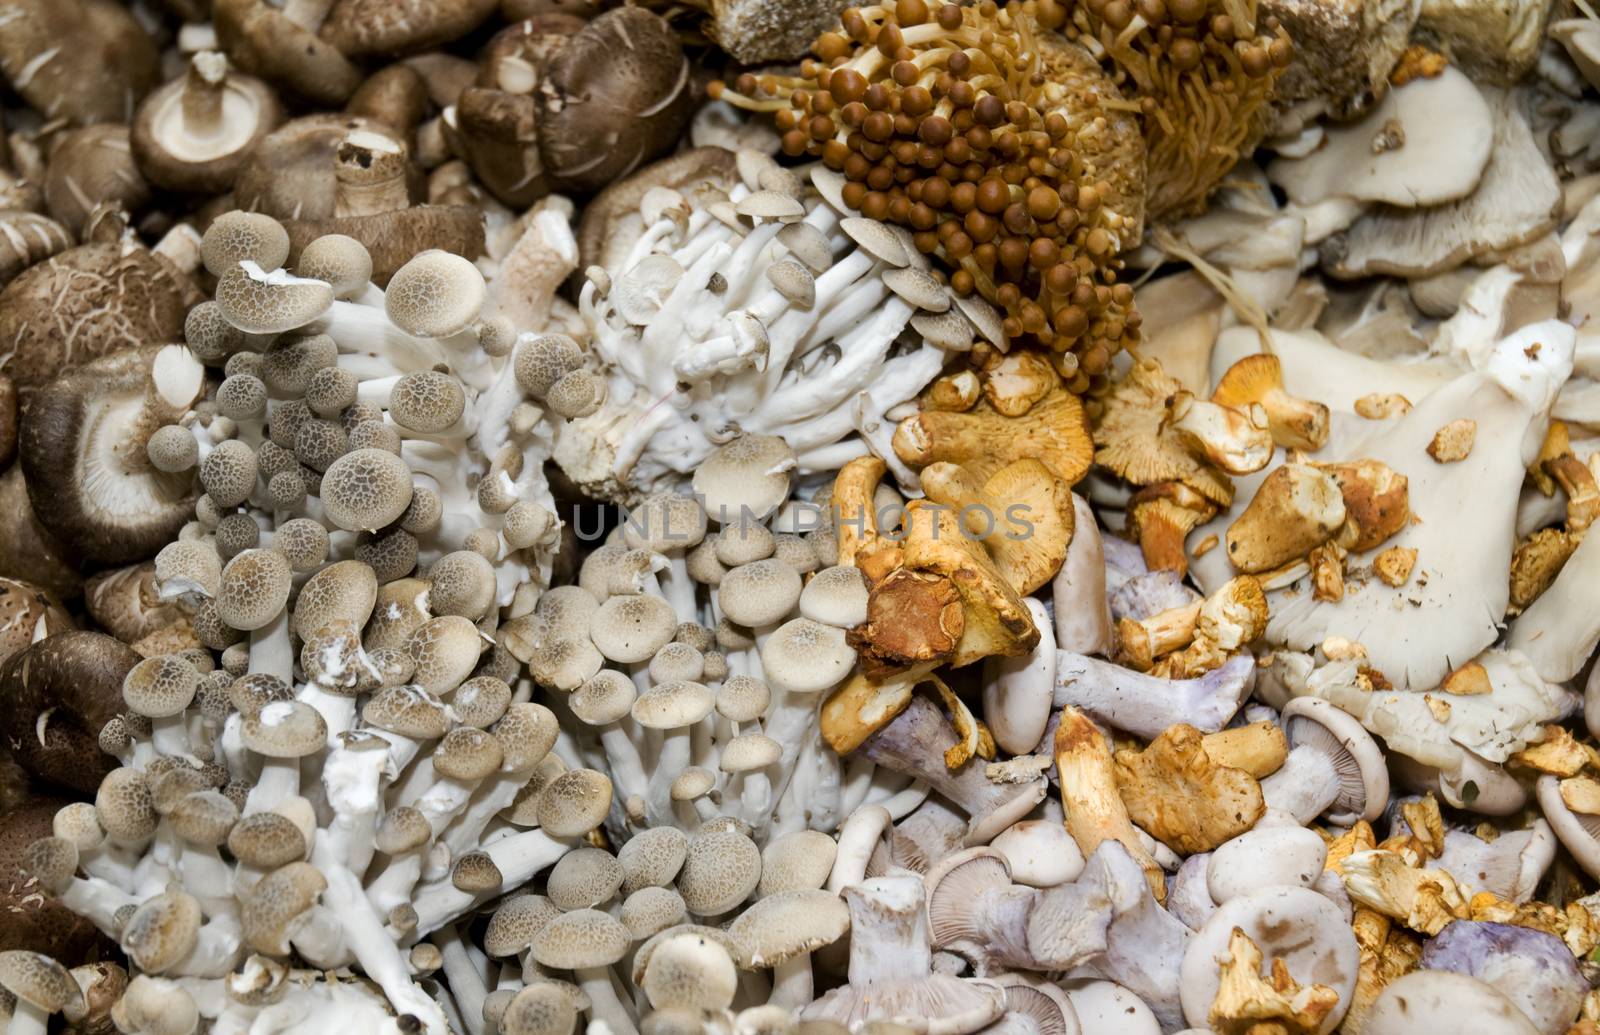 A variety of different mushrooms on a market stall